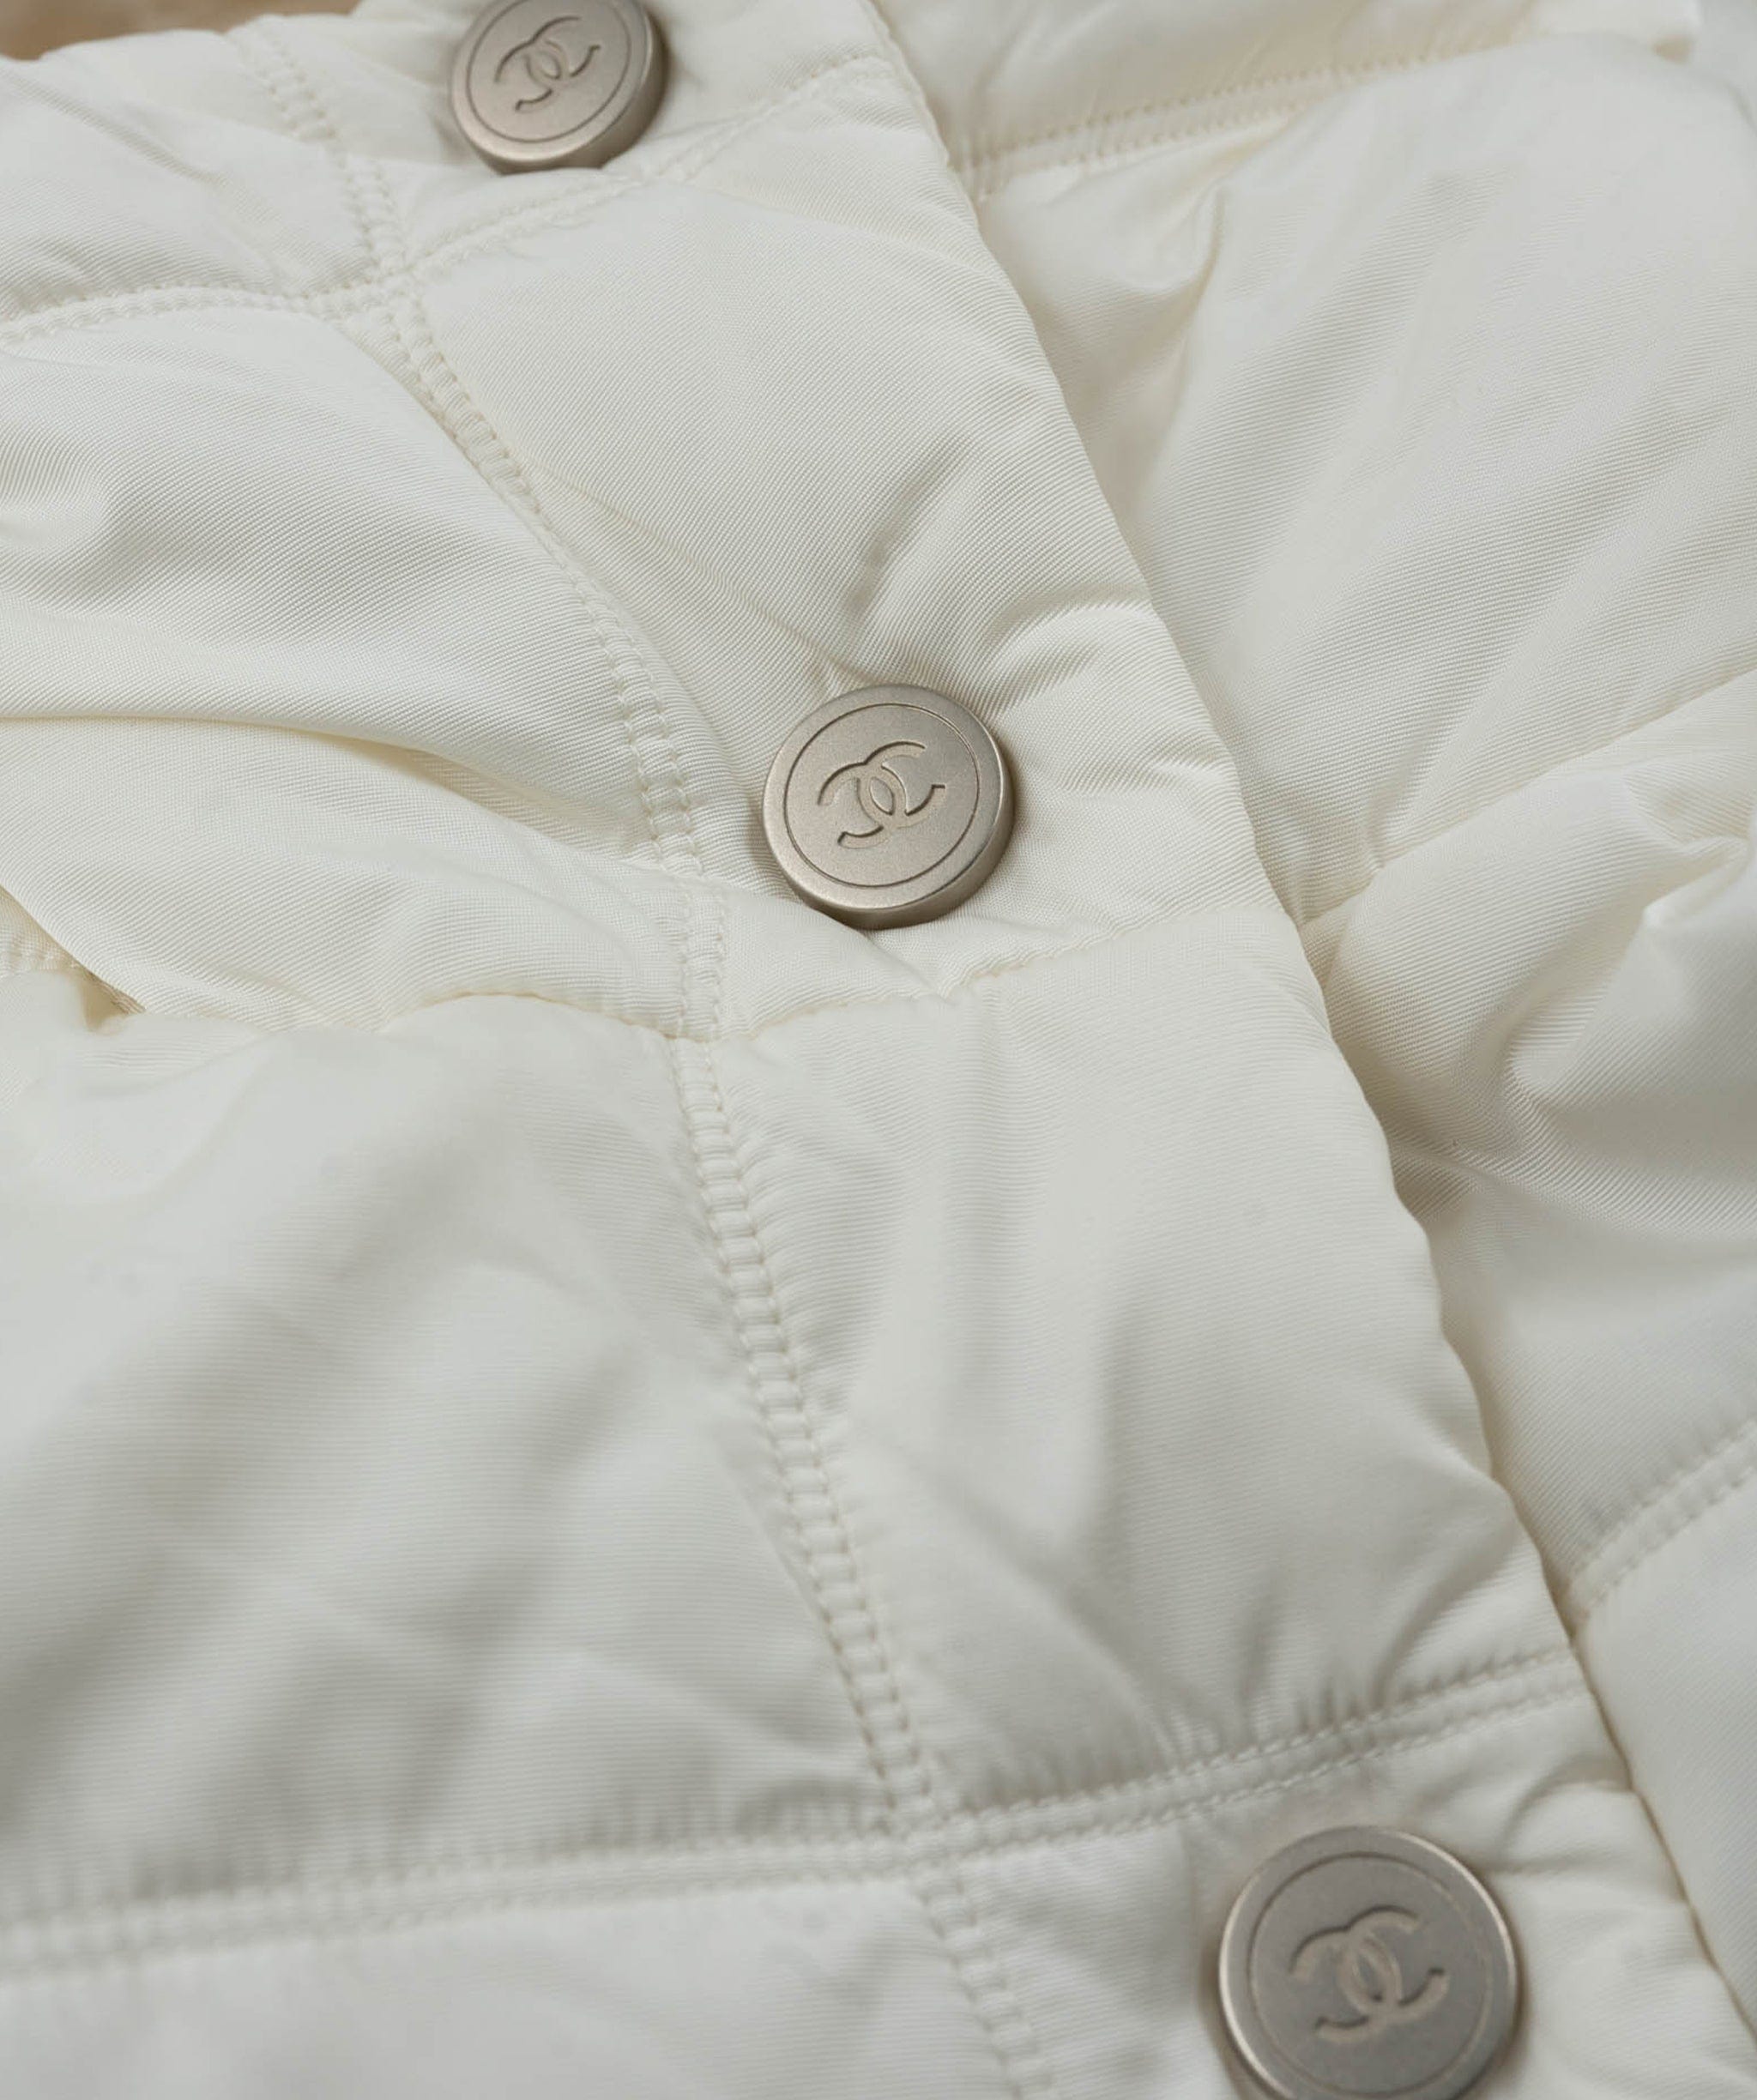 Chanel Chanel 00A Puffer Coat White ASL4613